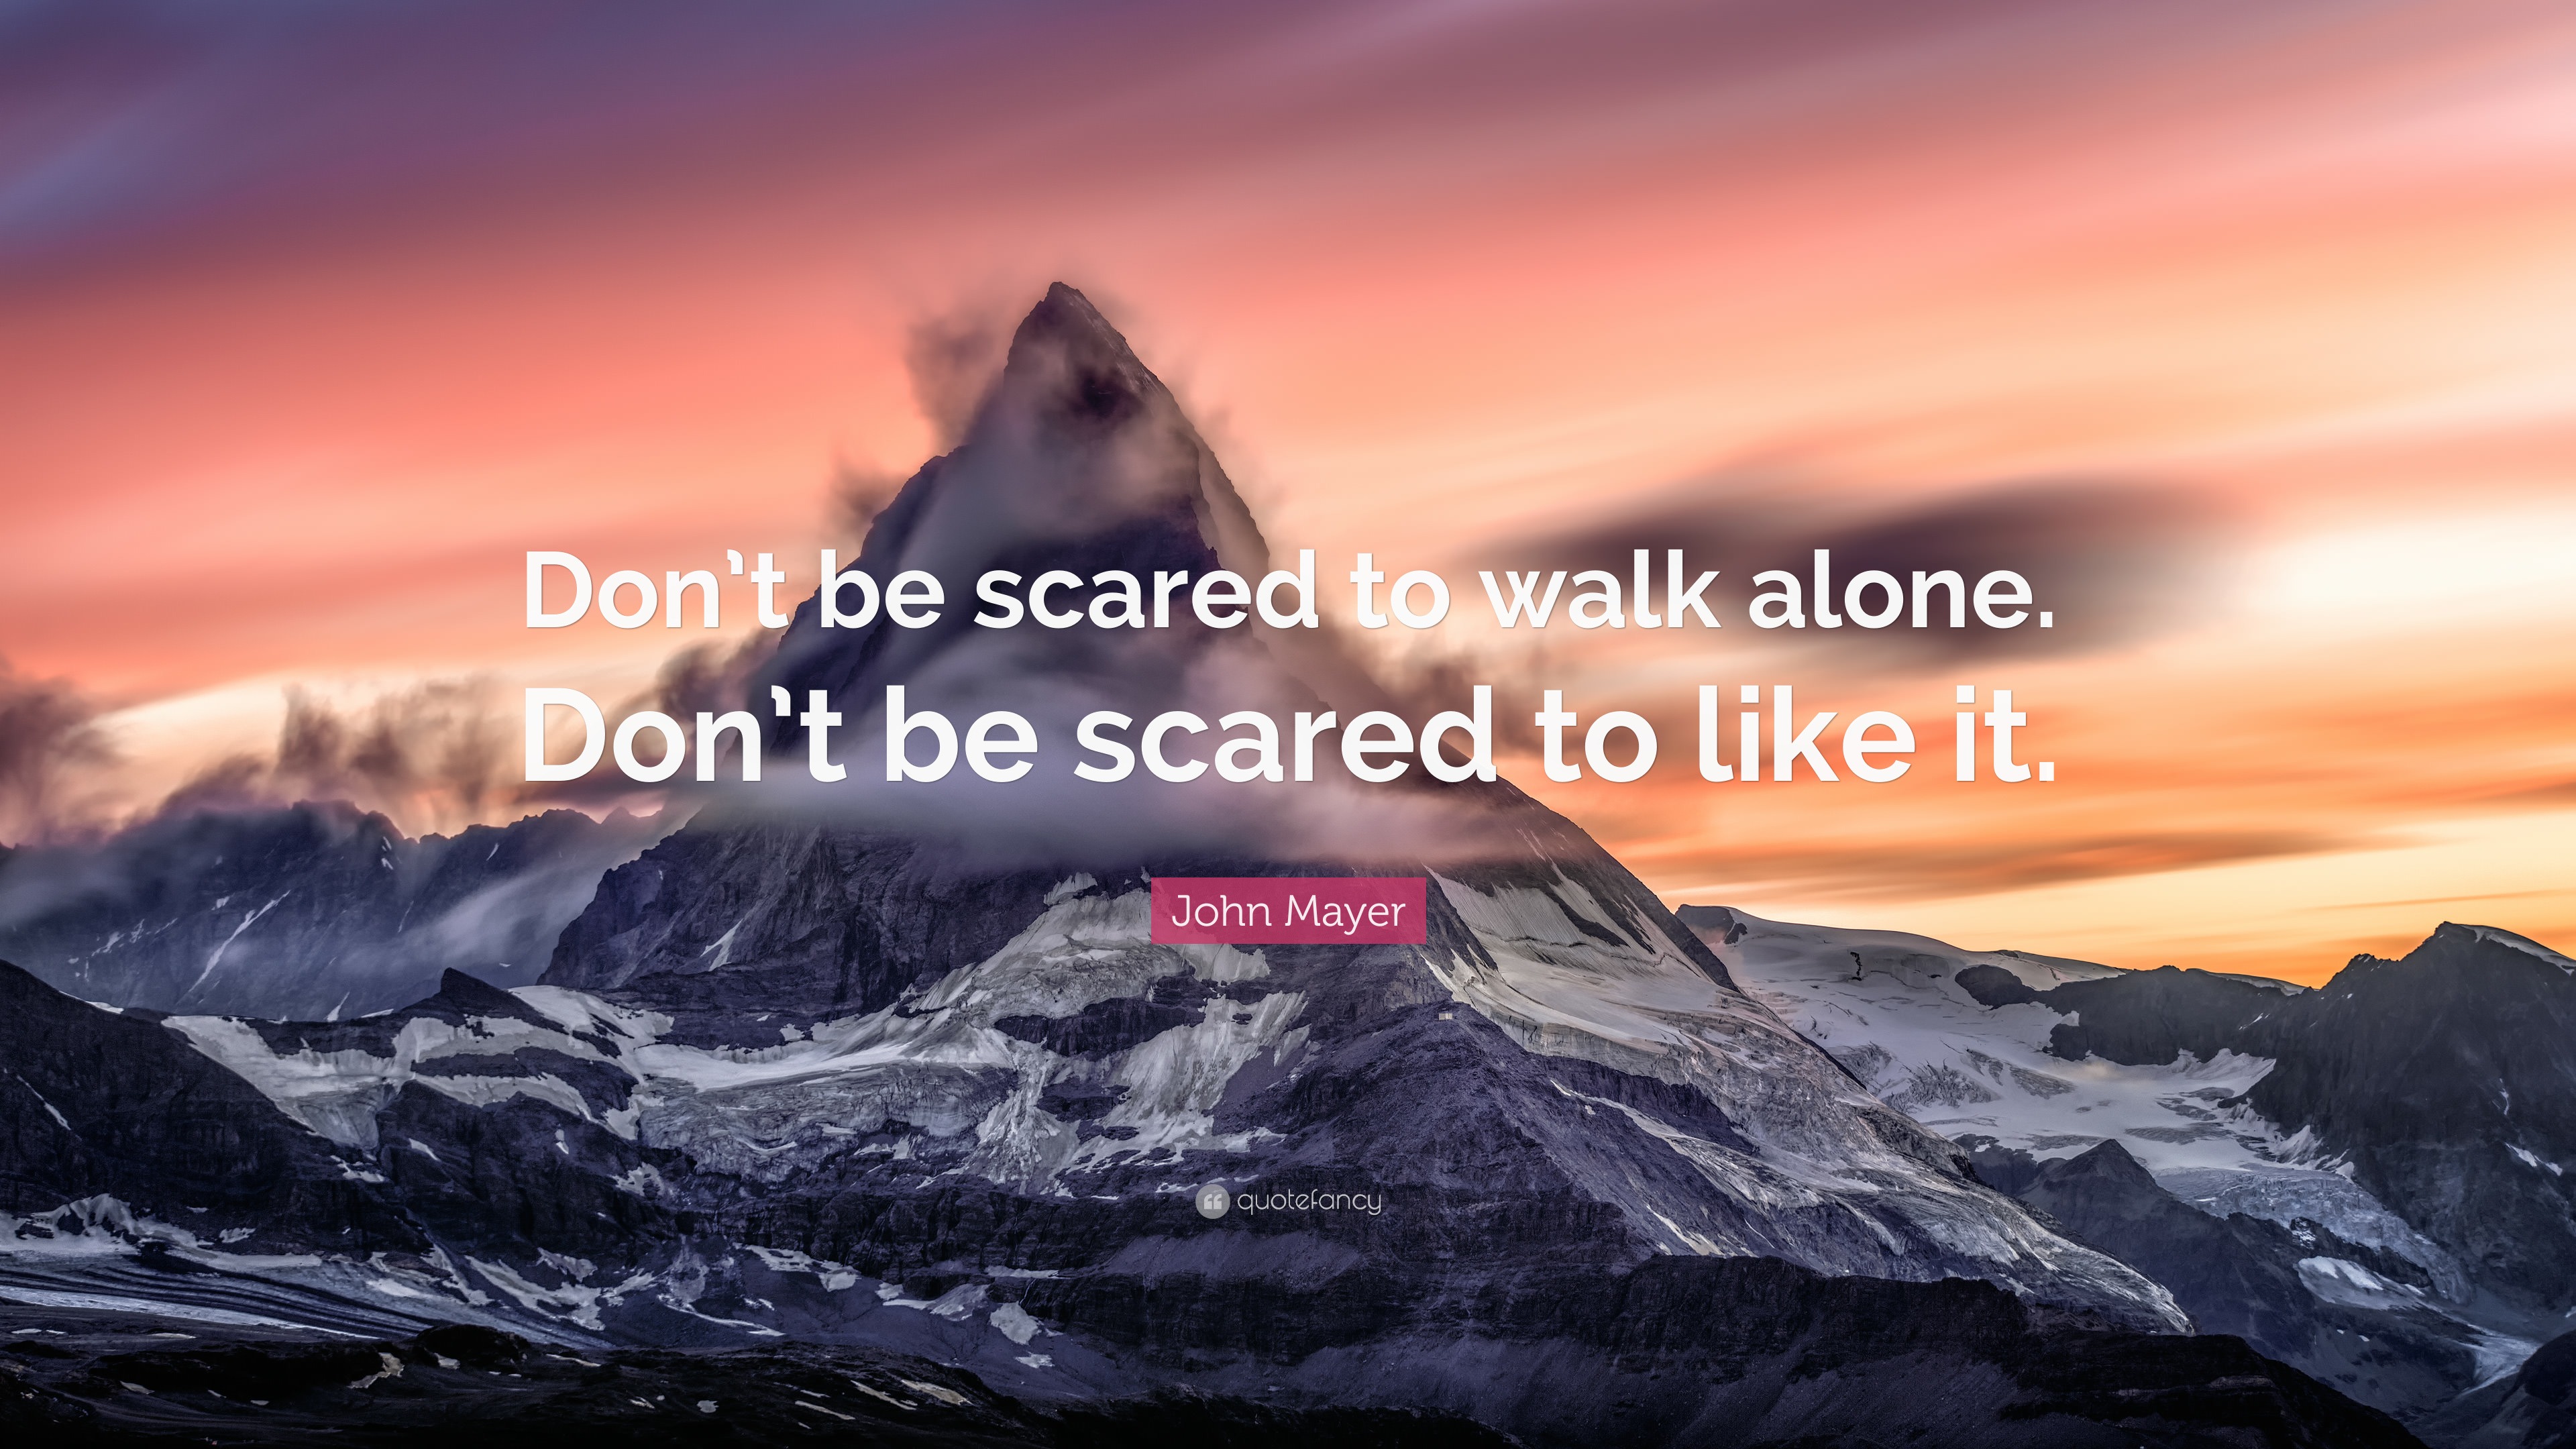 John Mayer Quote: “Don't be scared to walk alone. Don't be scared